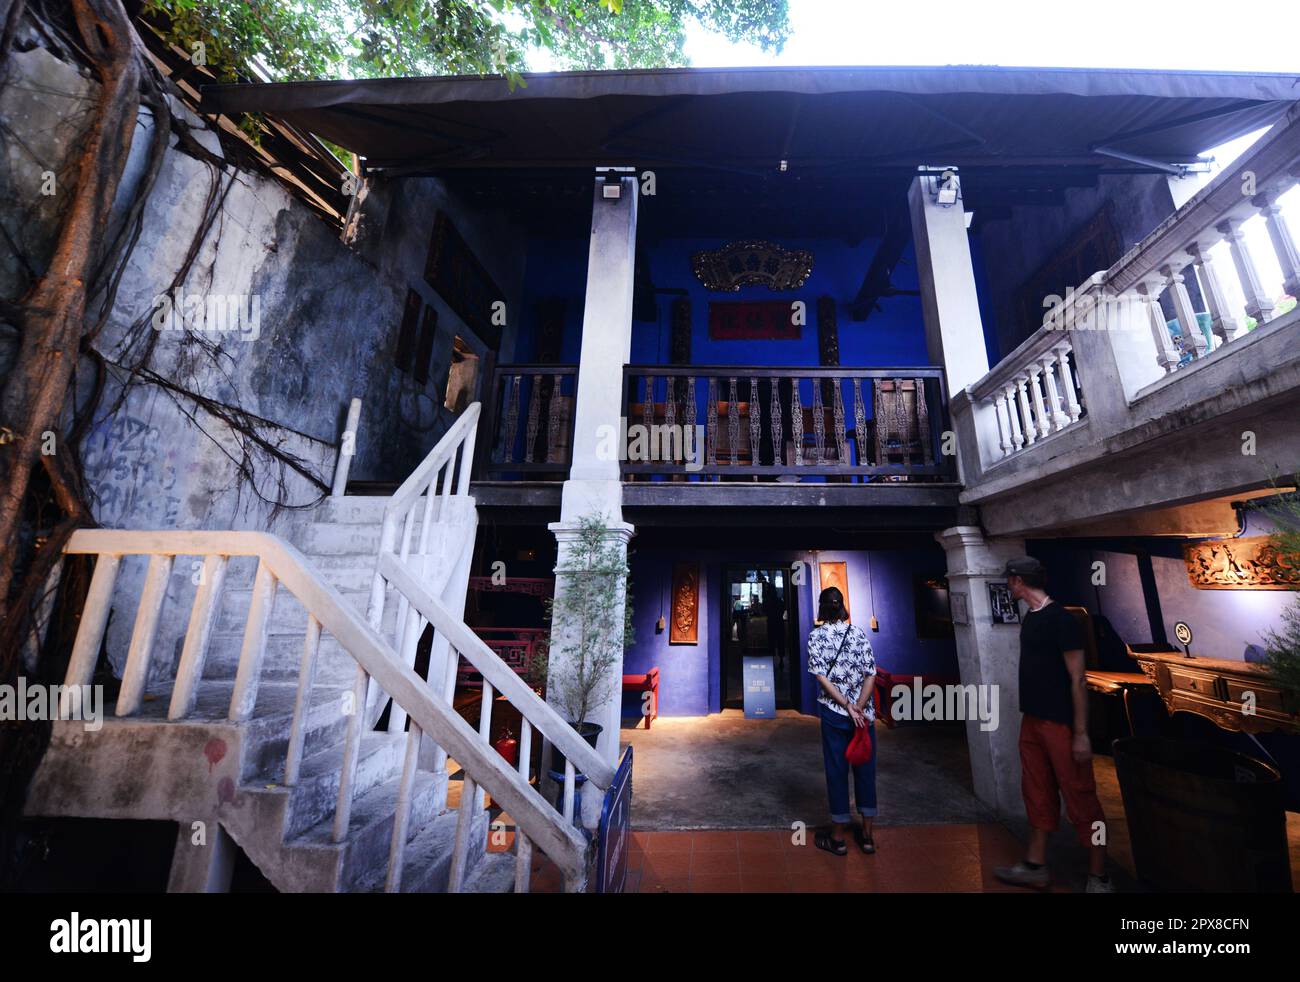 One of the restored old wooden houses at the Hong Sieng Kong restaurant and gallery on the banks of the Chao Phraya river in Bangkok, Thailand. Stock Photo